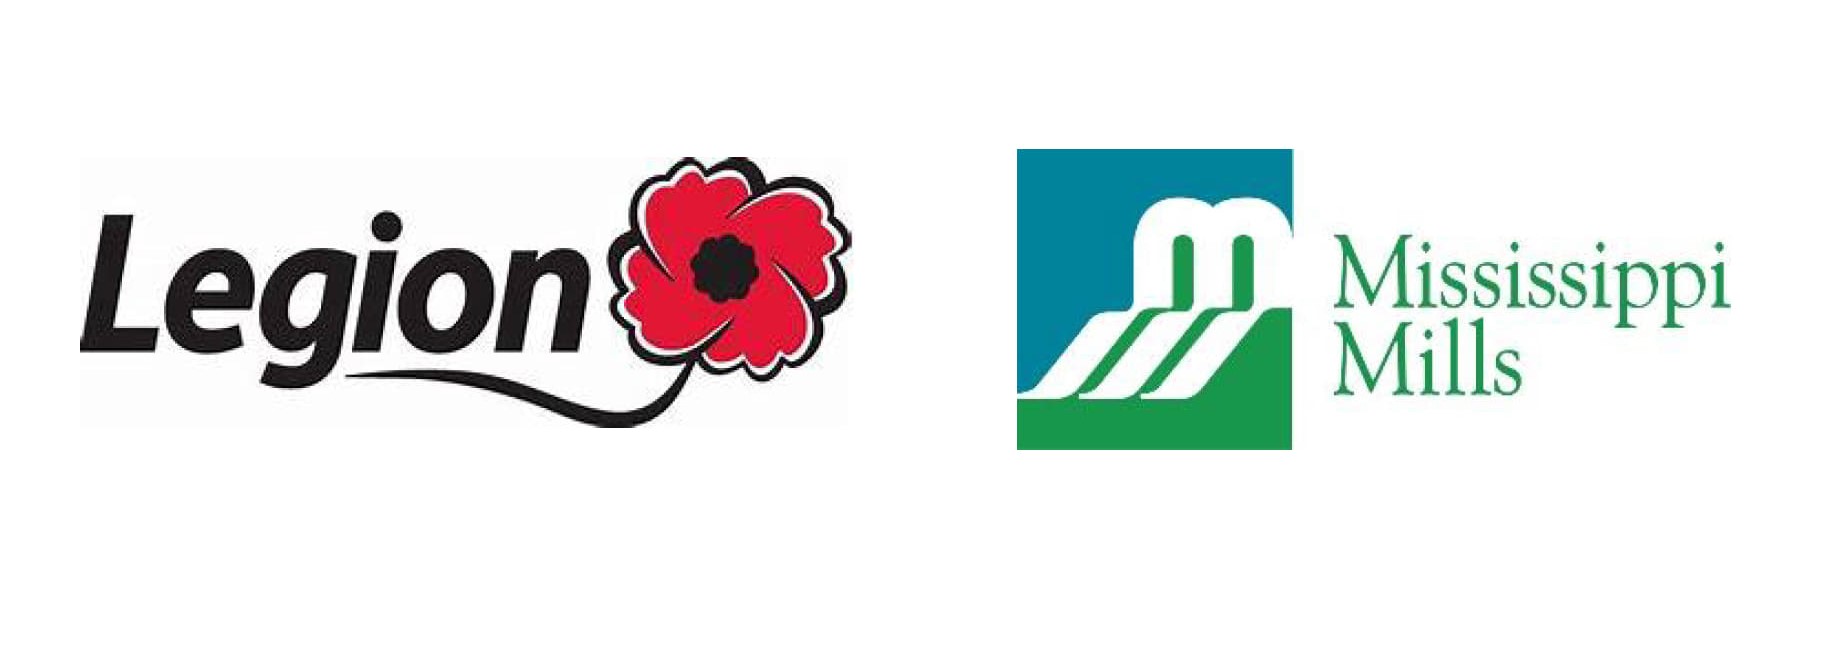 Royal Canadian Legion logo with red poppy and Municipality of Mississippi Mills logo in green and blue